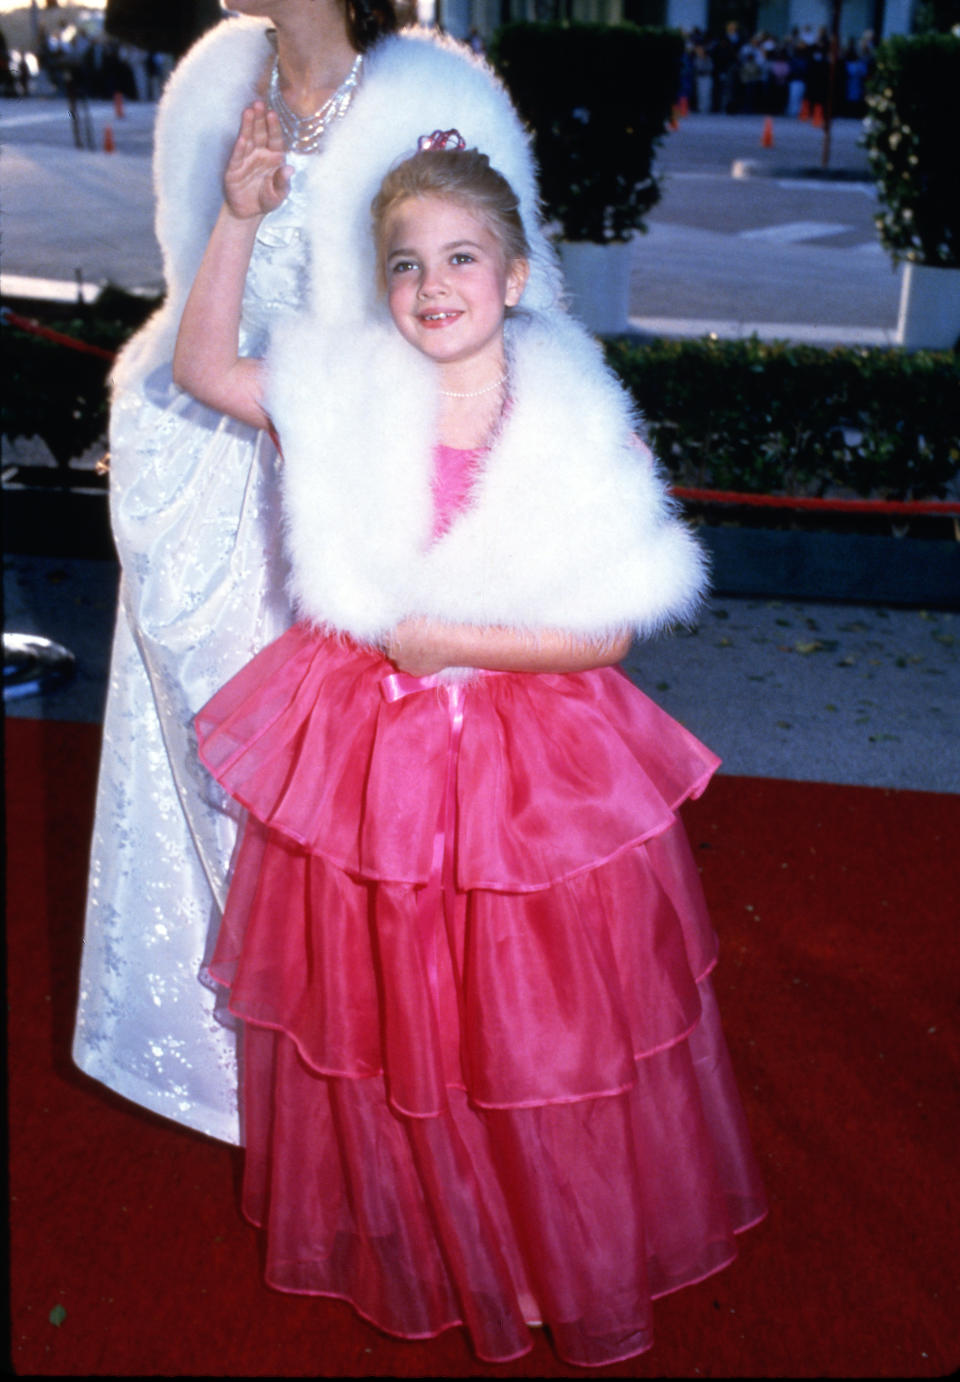 Drew Barrymore at the 55th Academy Awards on April 11, 1983. (Photo by Ralph Dominguez/MediaPunch via Getty Images)